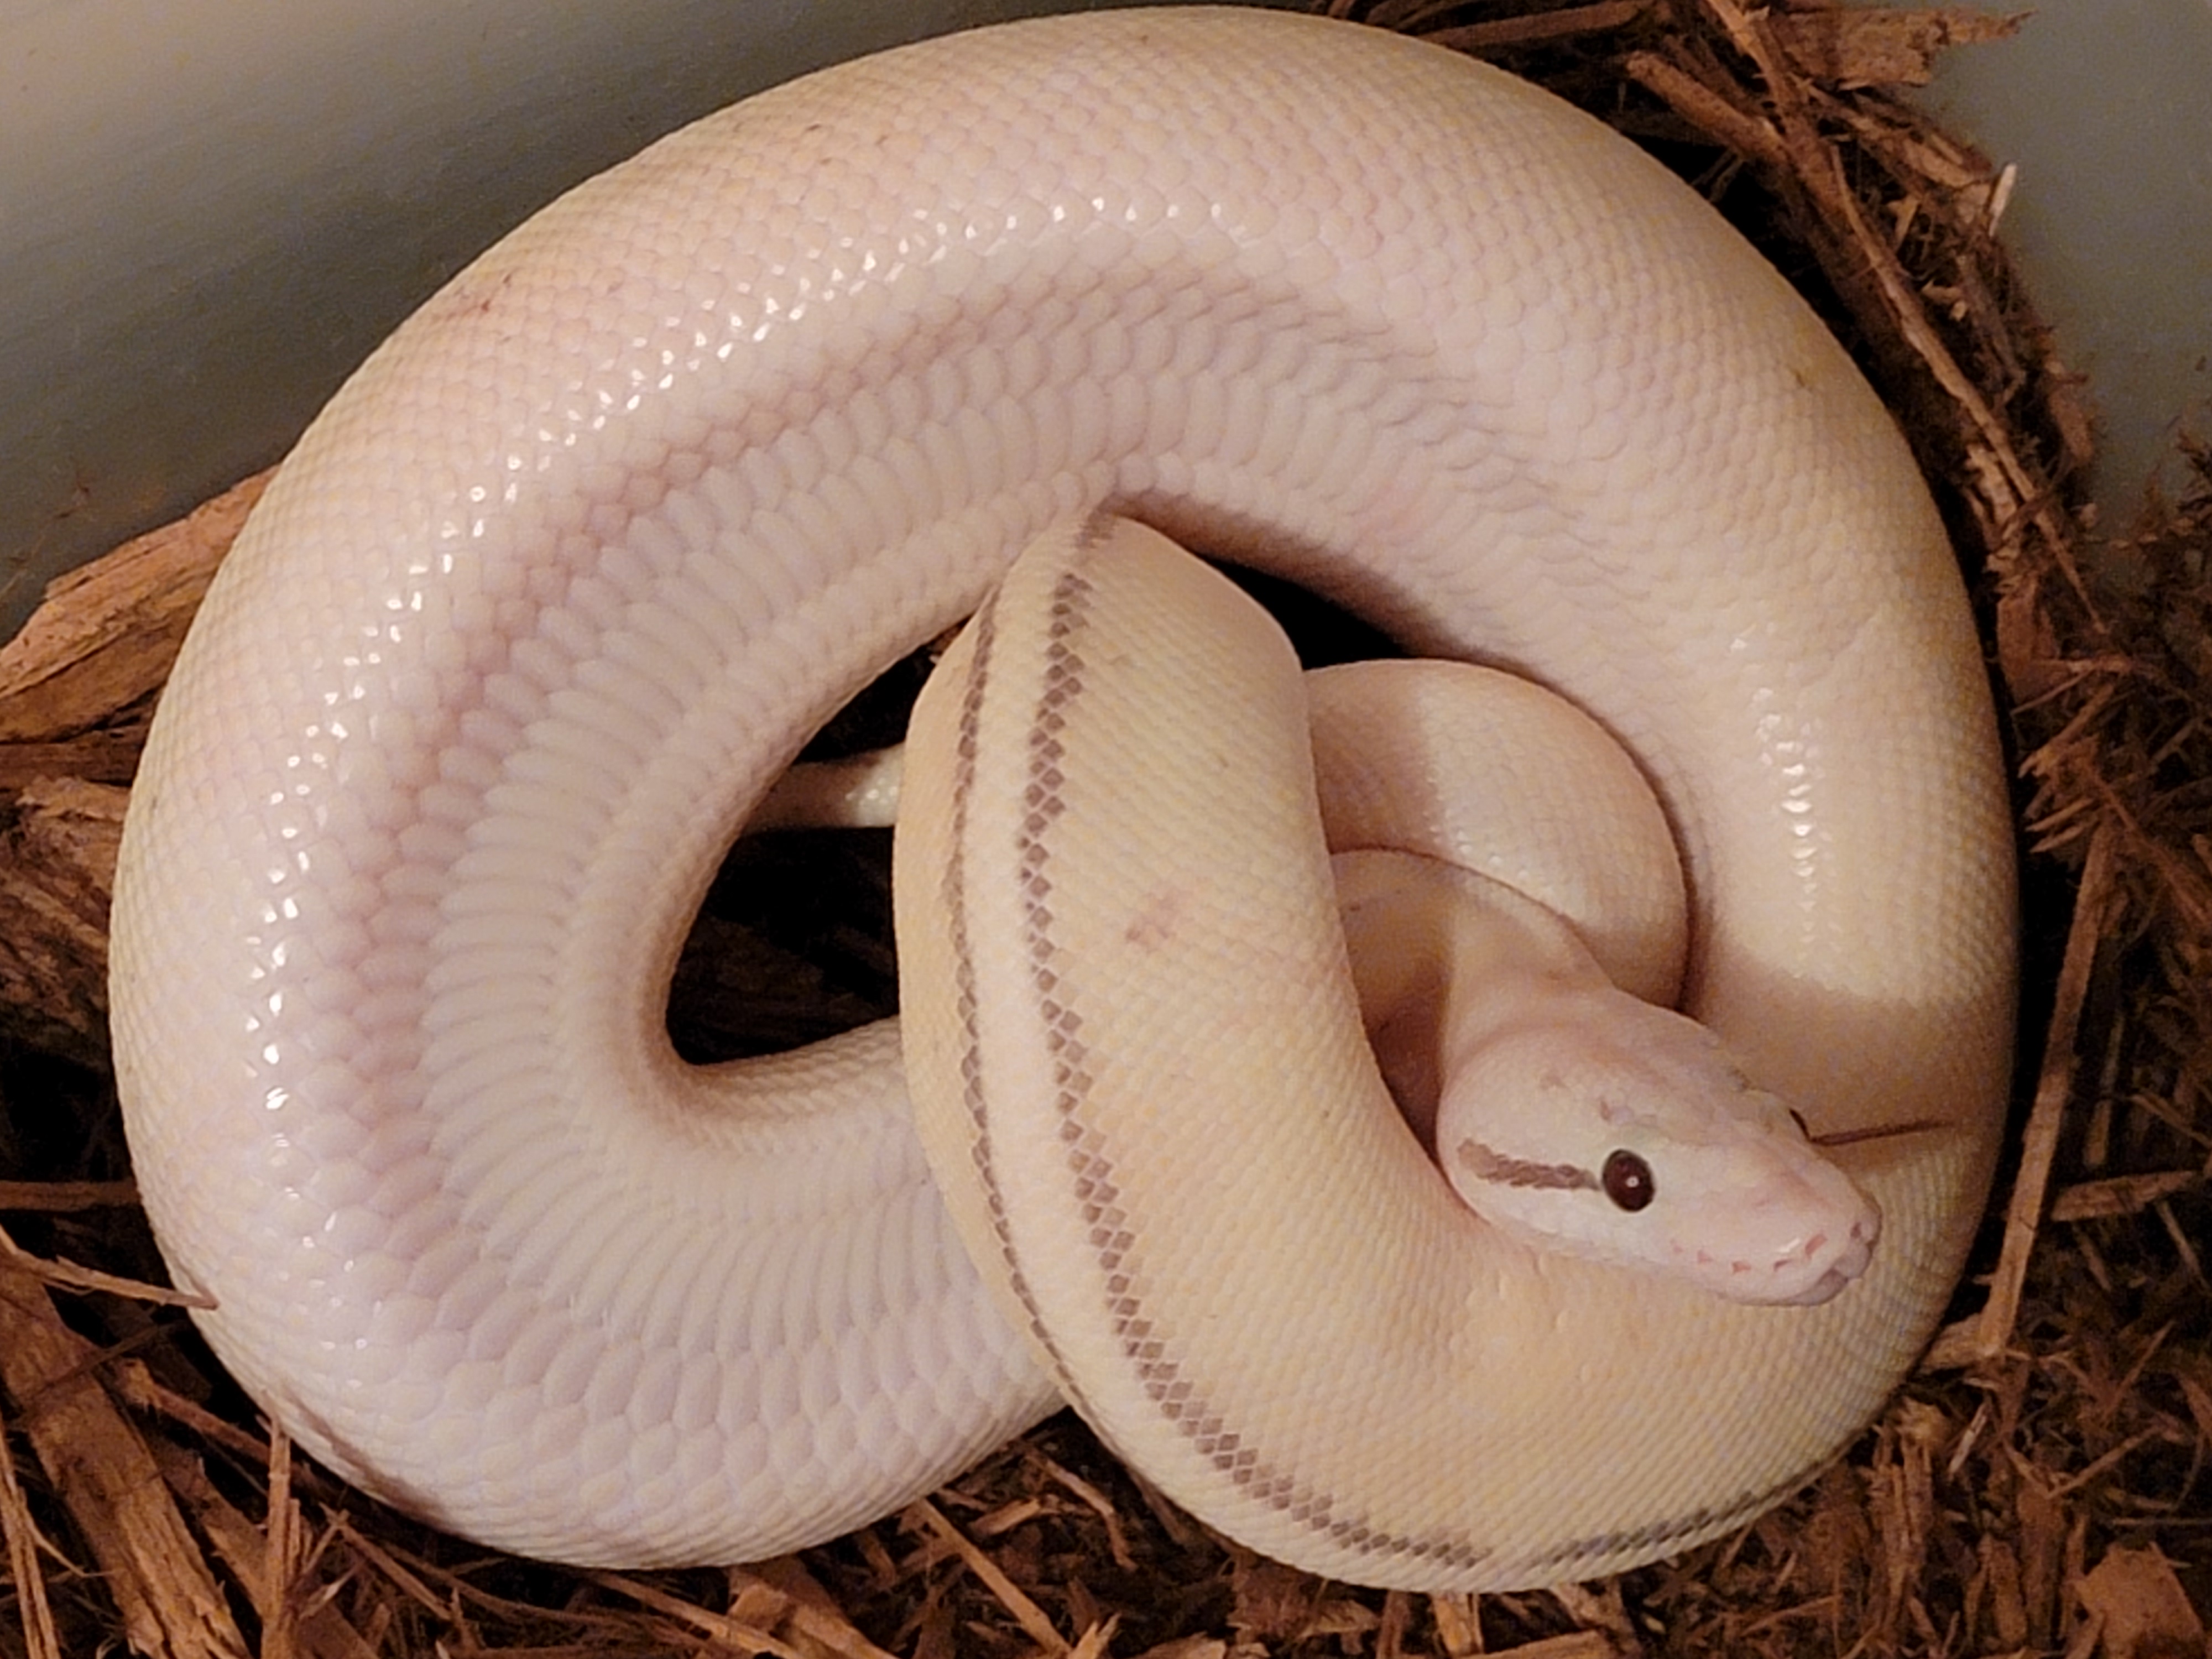 Super Spark Ball Python by Extraordinary Ectotherms